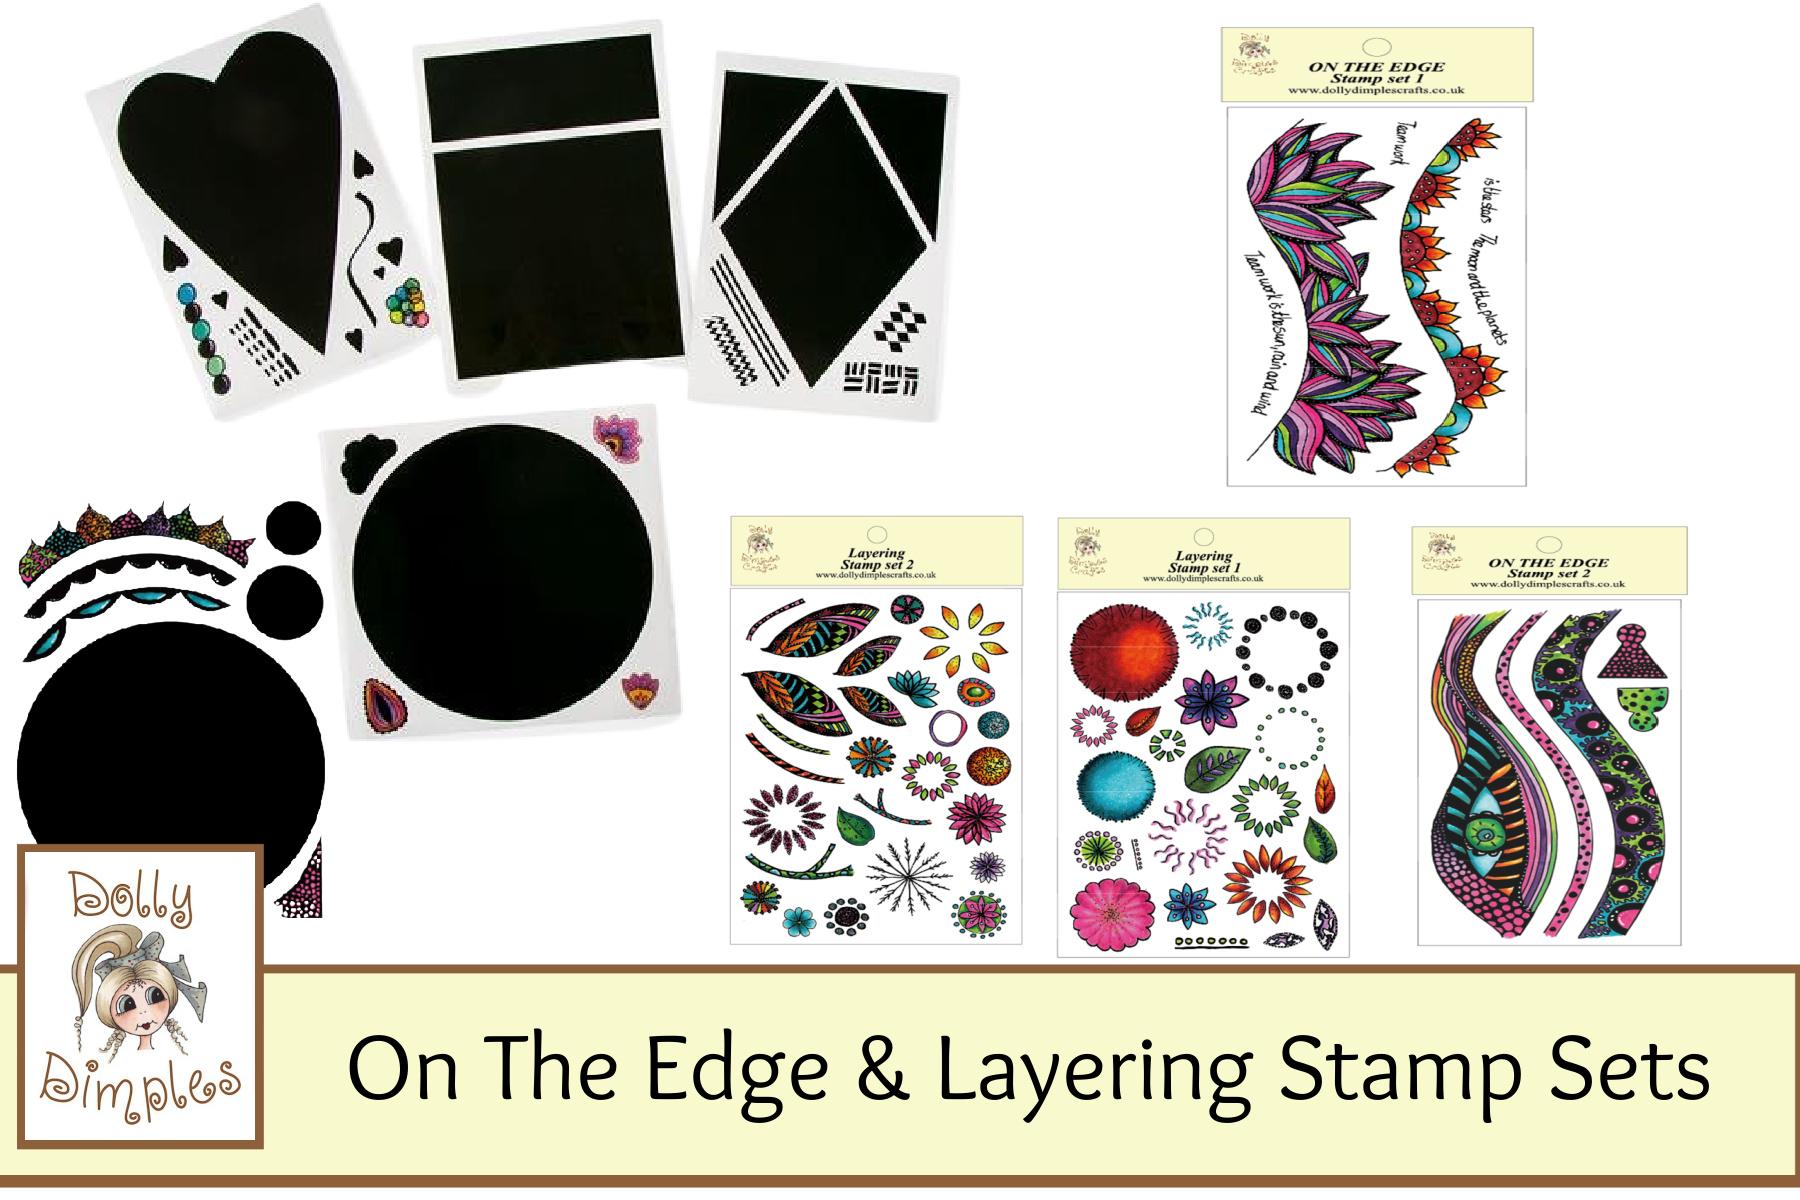 On The Edge & Layering Stamp Sets